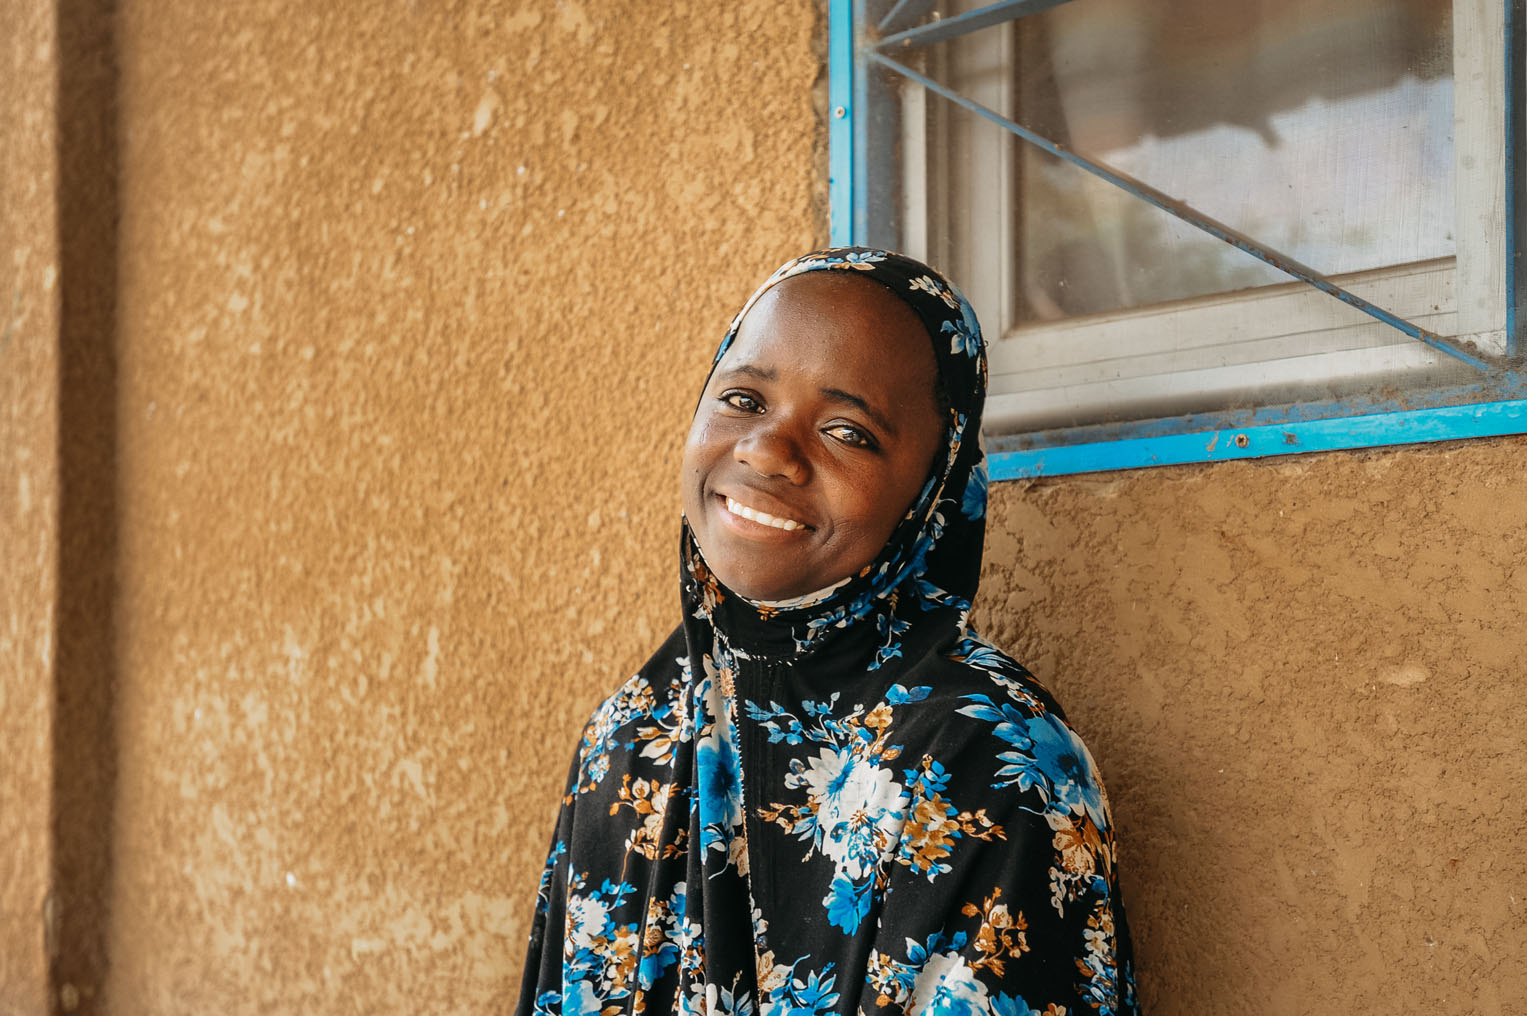 One of a number of patients flashes a smile following her recovery after corrective fistula surgery that will bring normalcy and community back to her life.